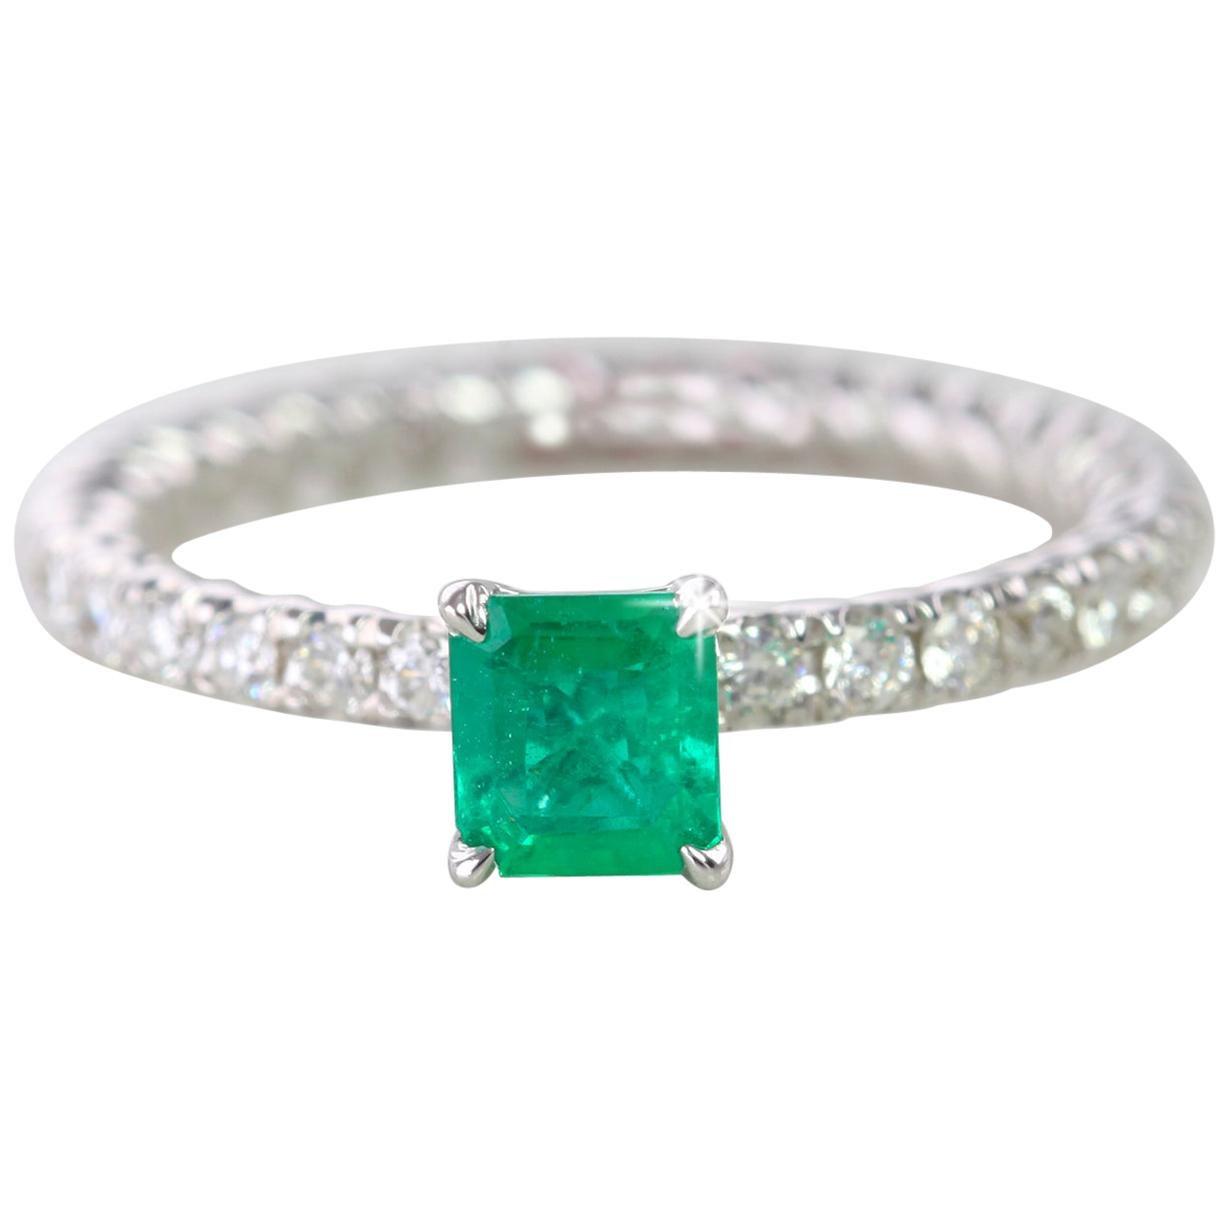 Emerald Engagement and Dainty Ring with Pave Diamond Setting